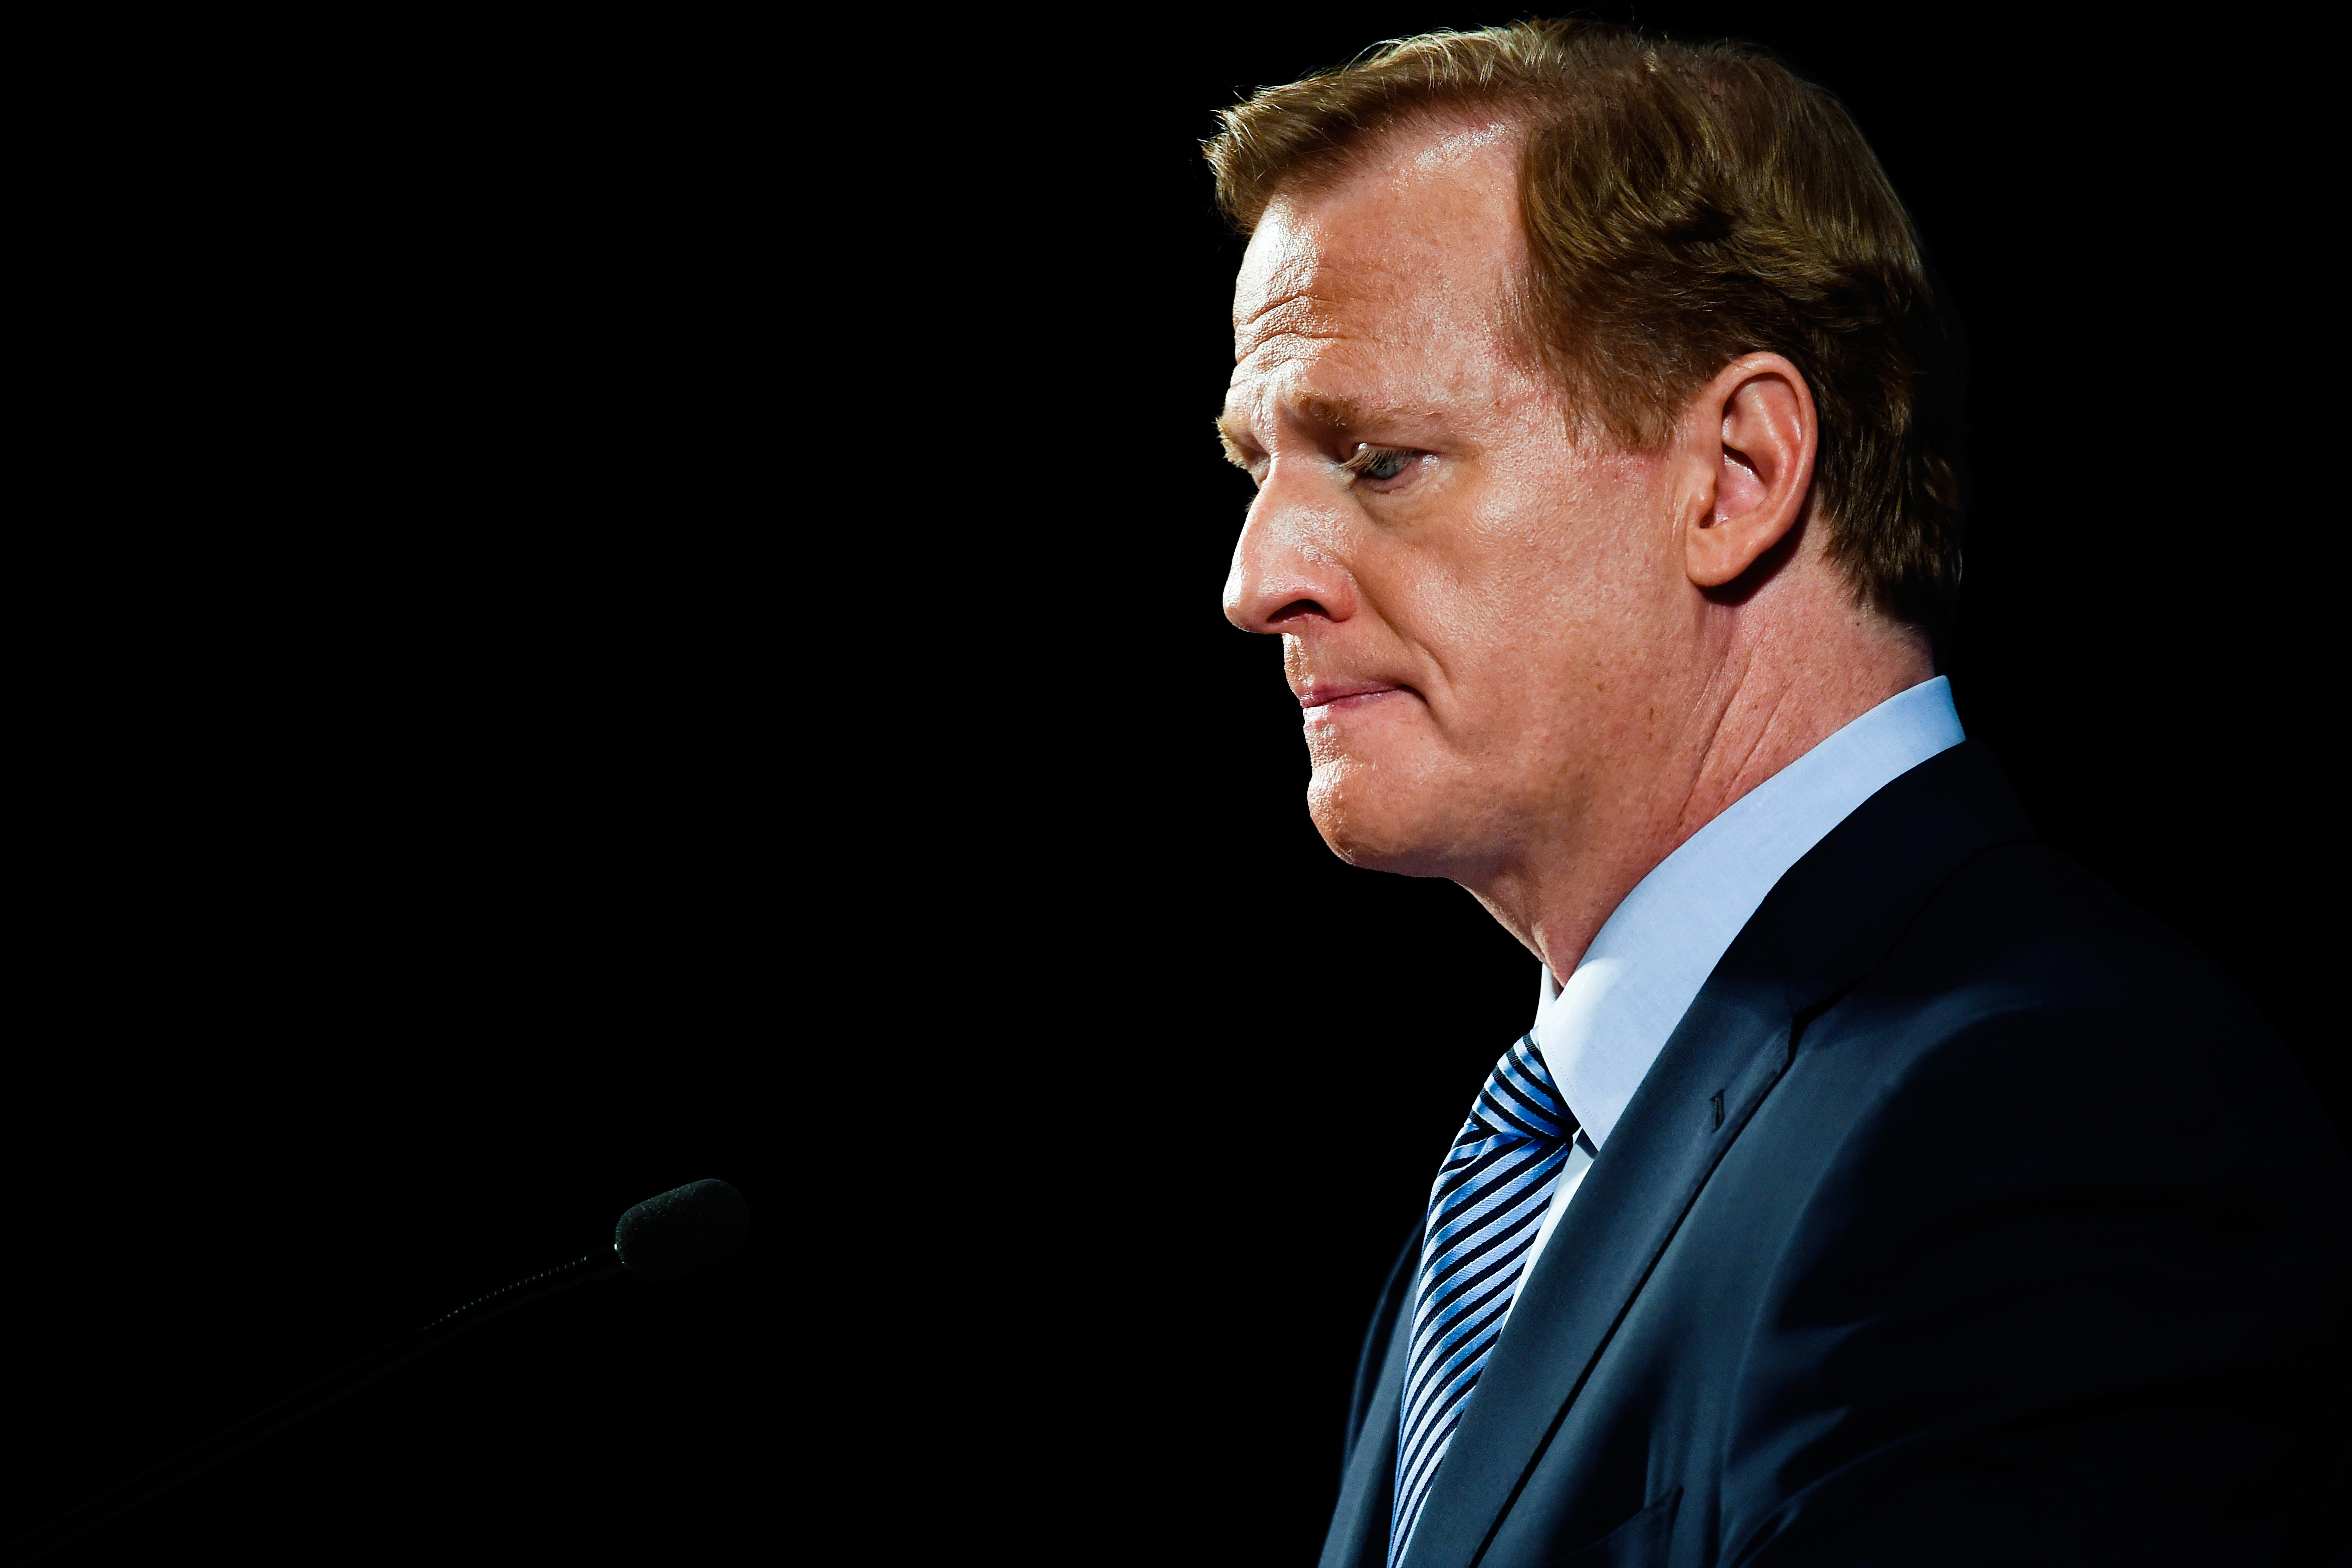 National Football League commissioner Roger Goodell speaks during a press conference on September 19, 2014 in New York City. (Alex Goodlett–Getty Images)